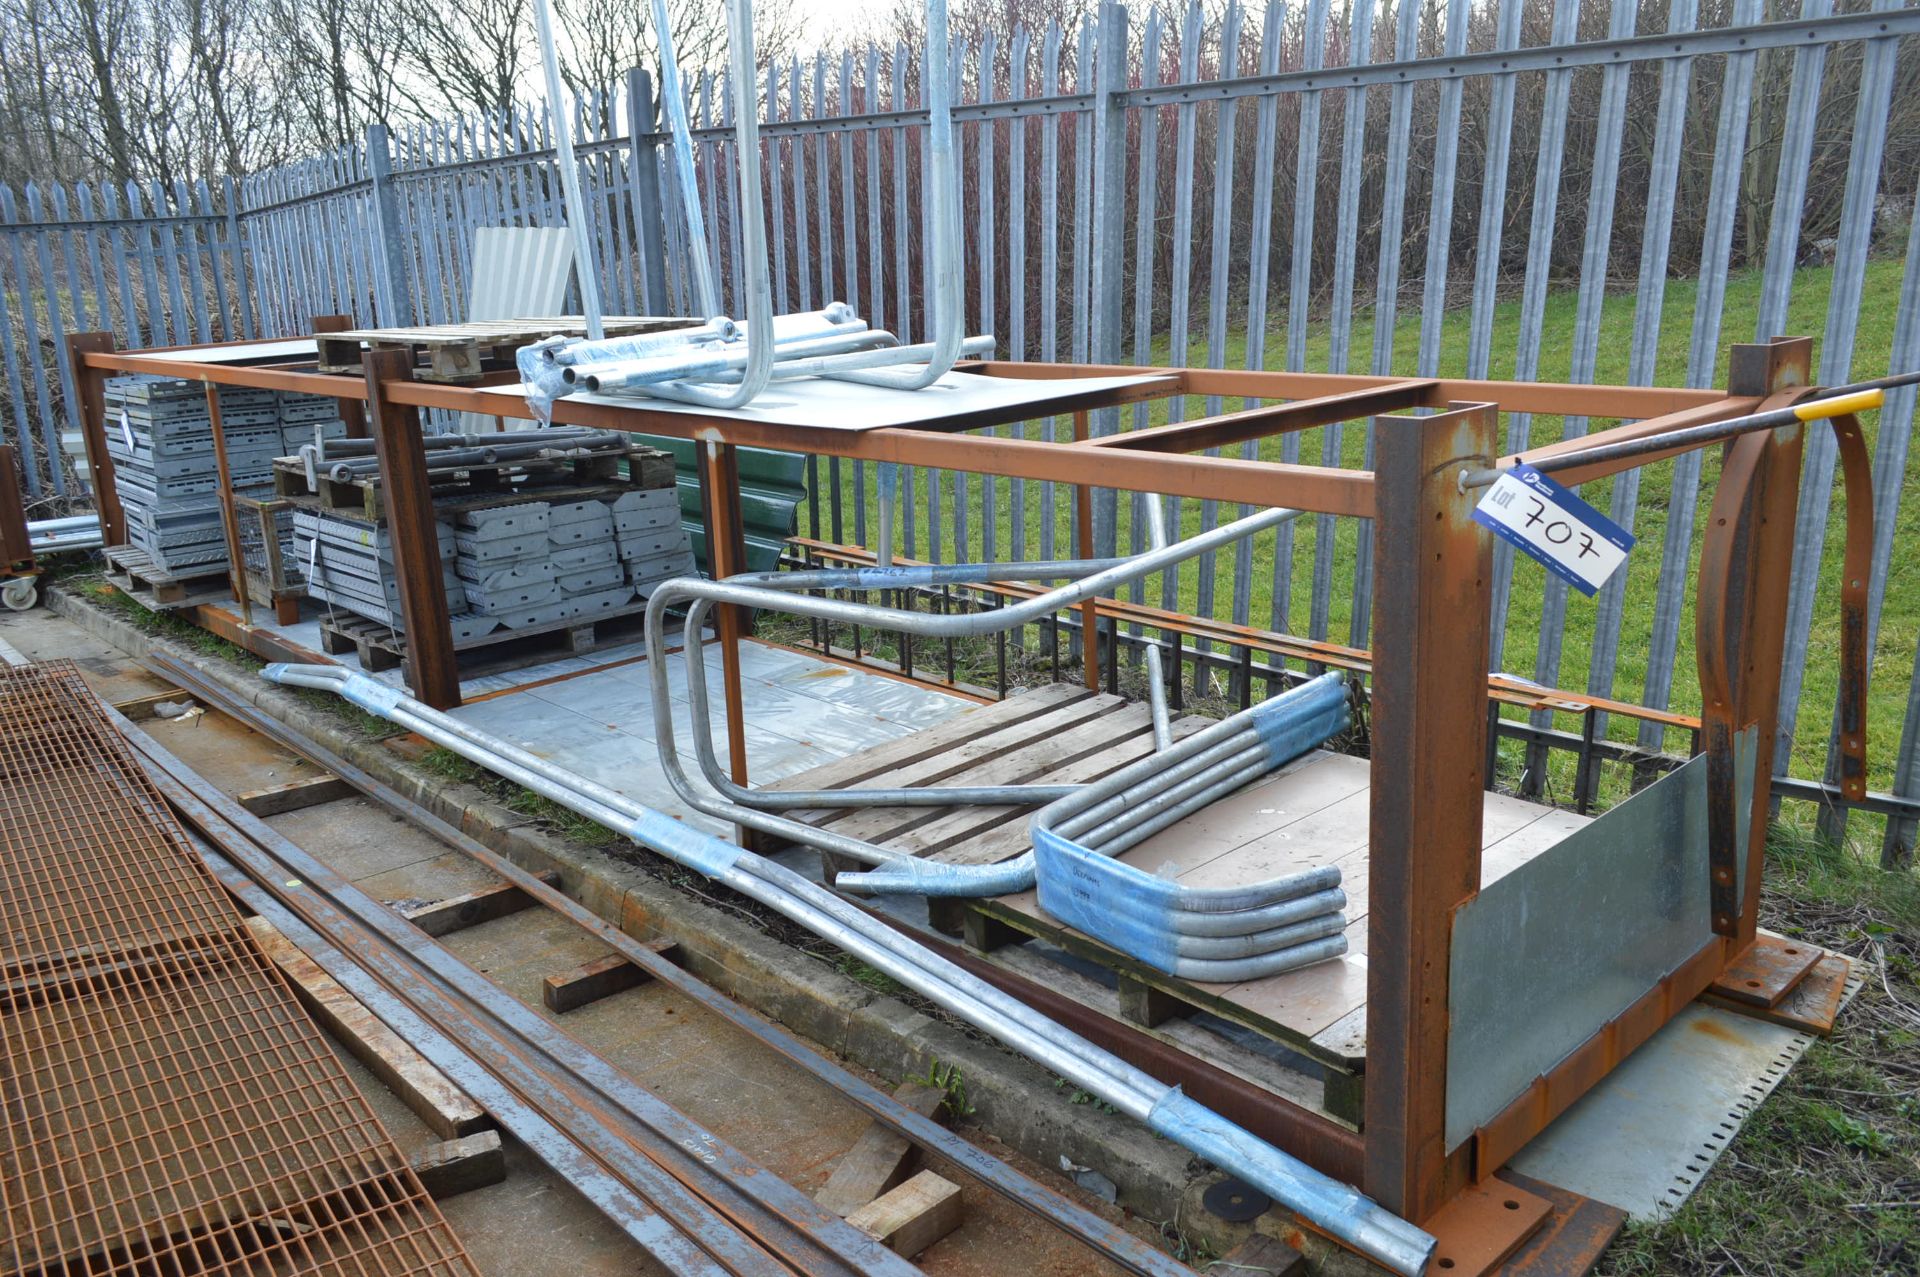 Fabricated Steel Rack (reserve removal until conte